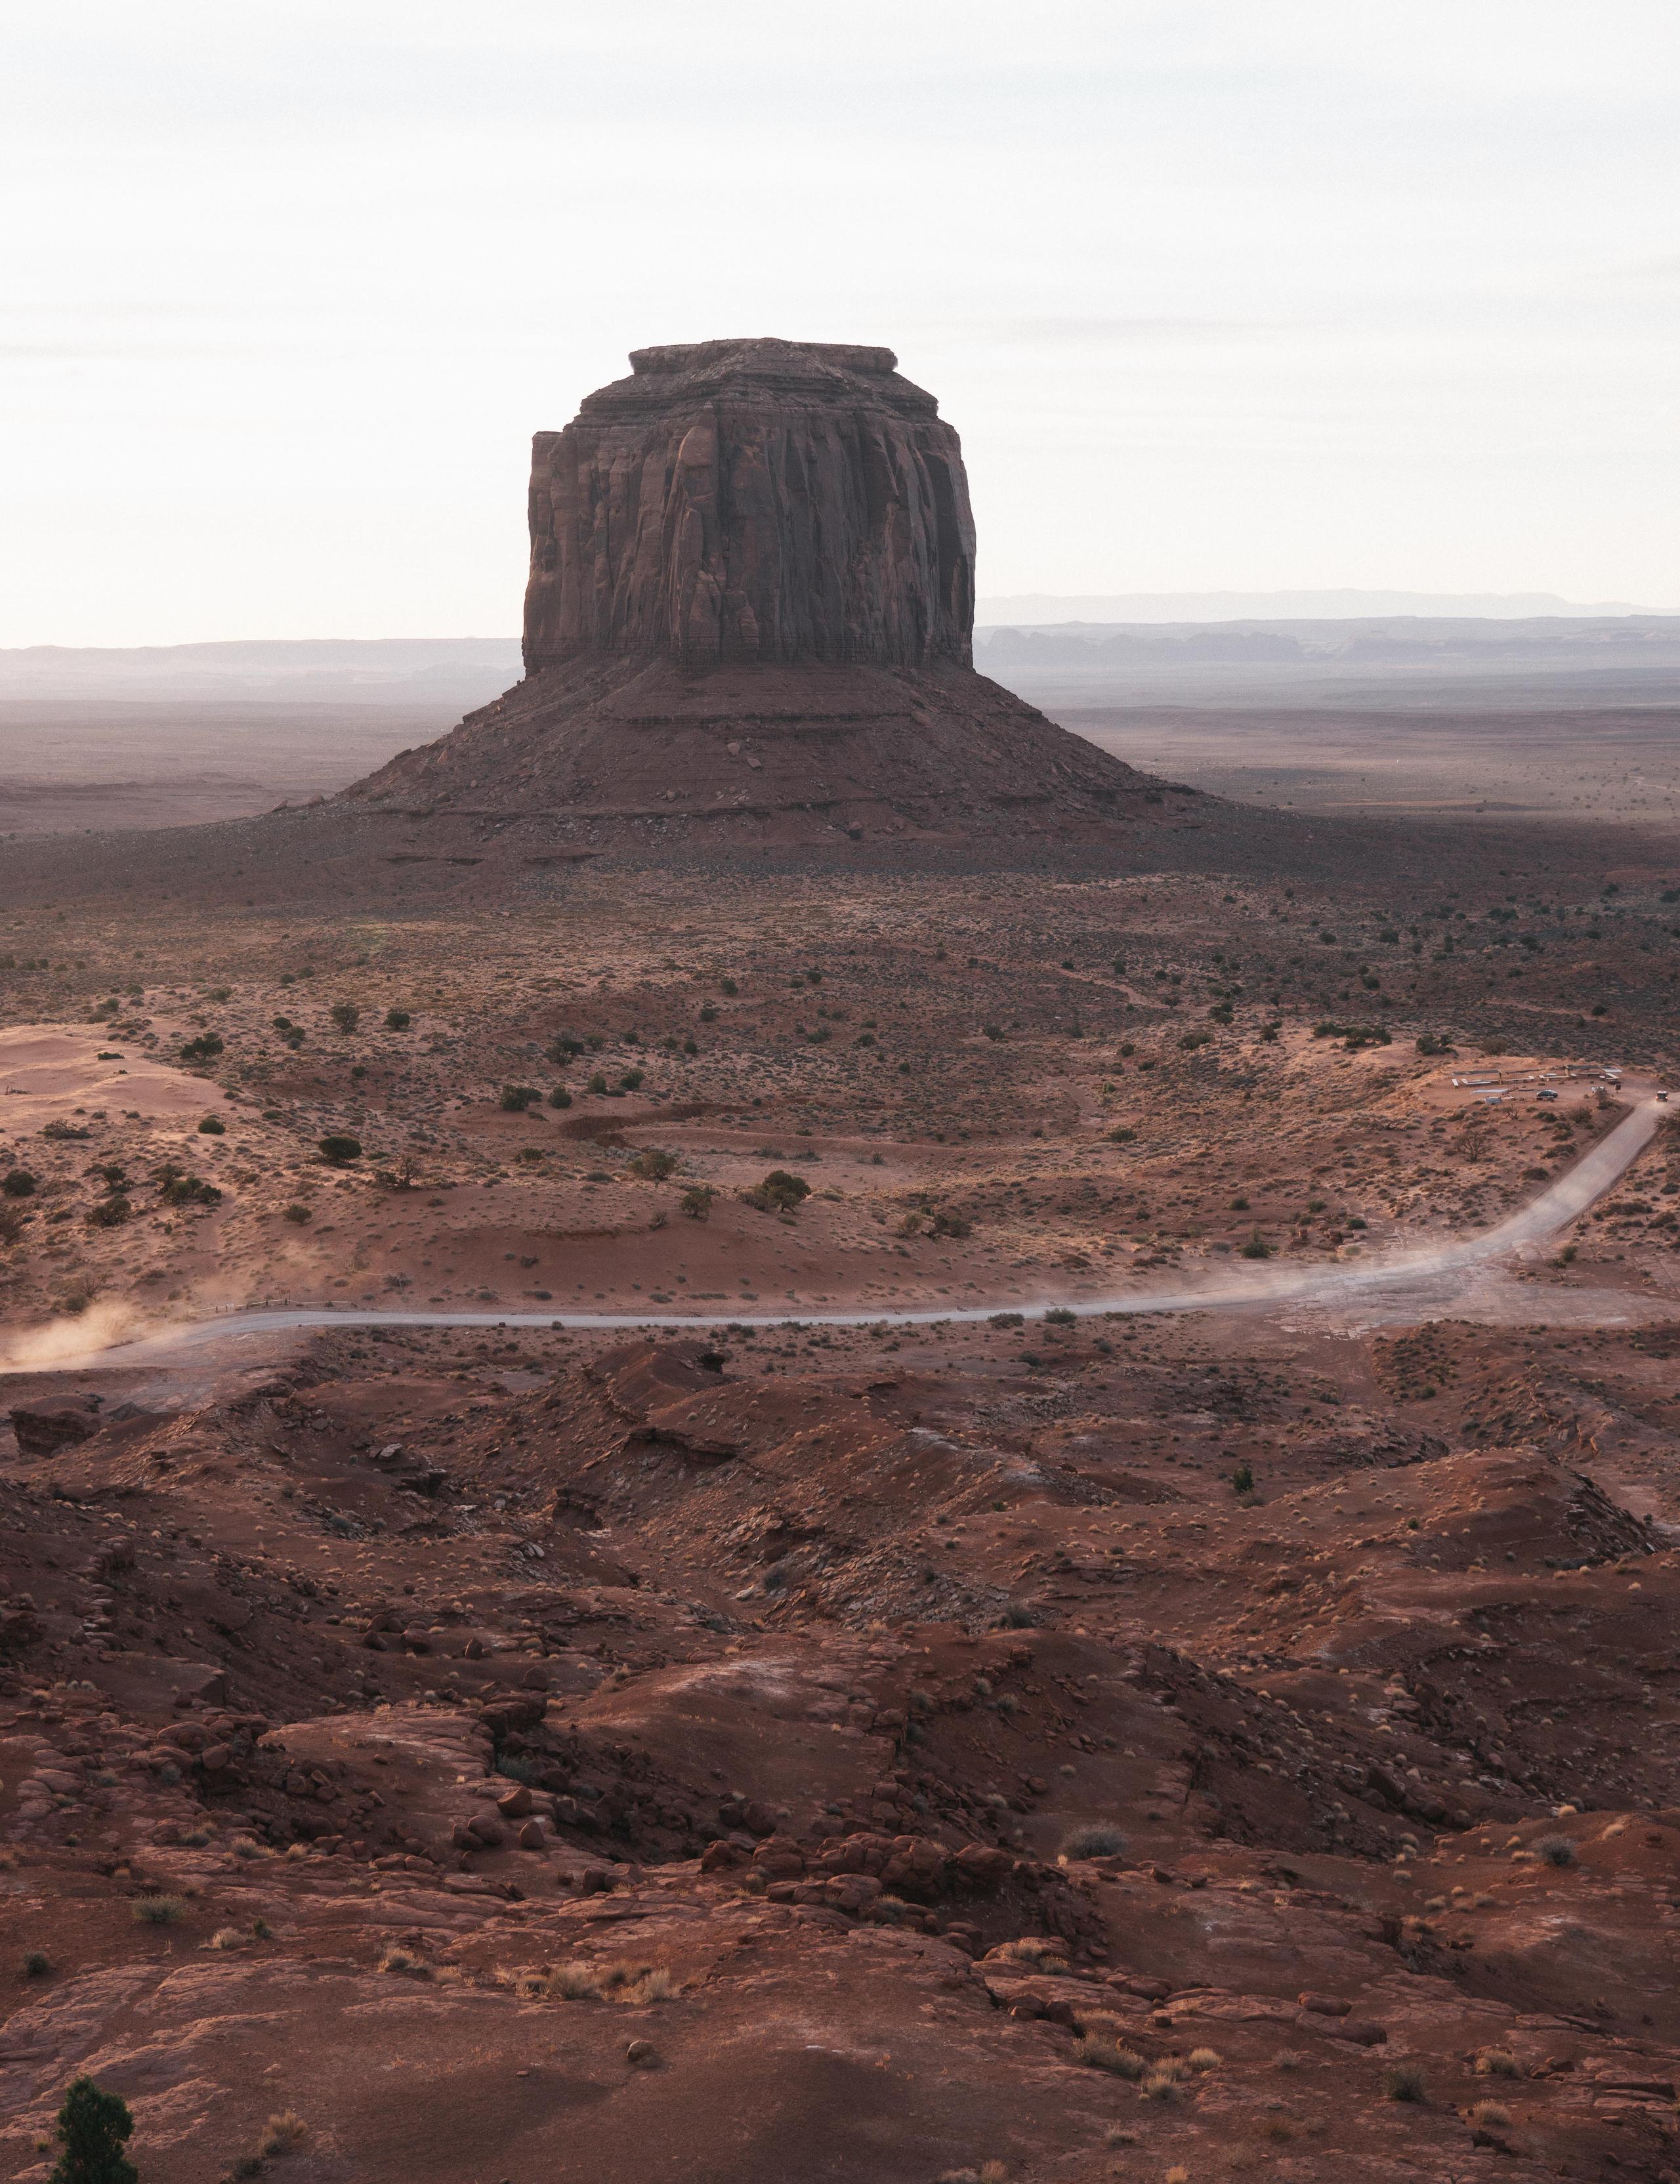 Landscape of Monument Valley and a road winding through it